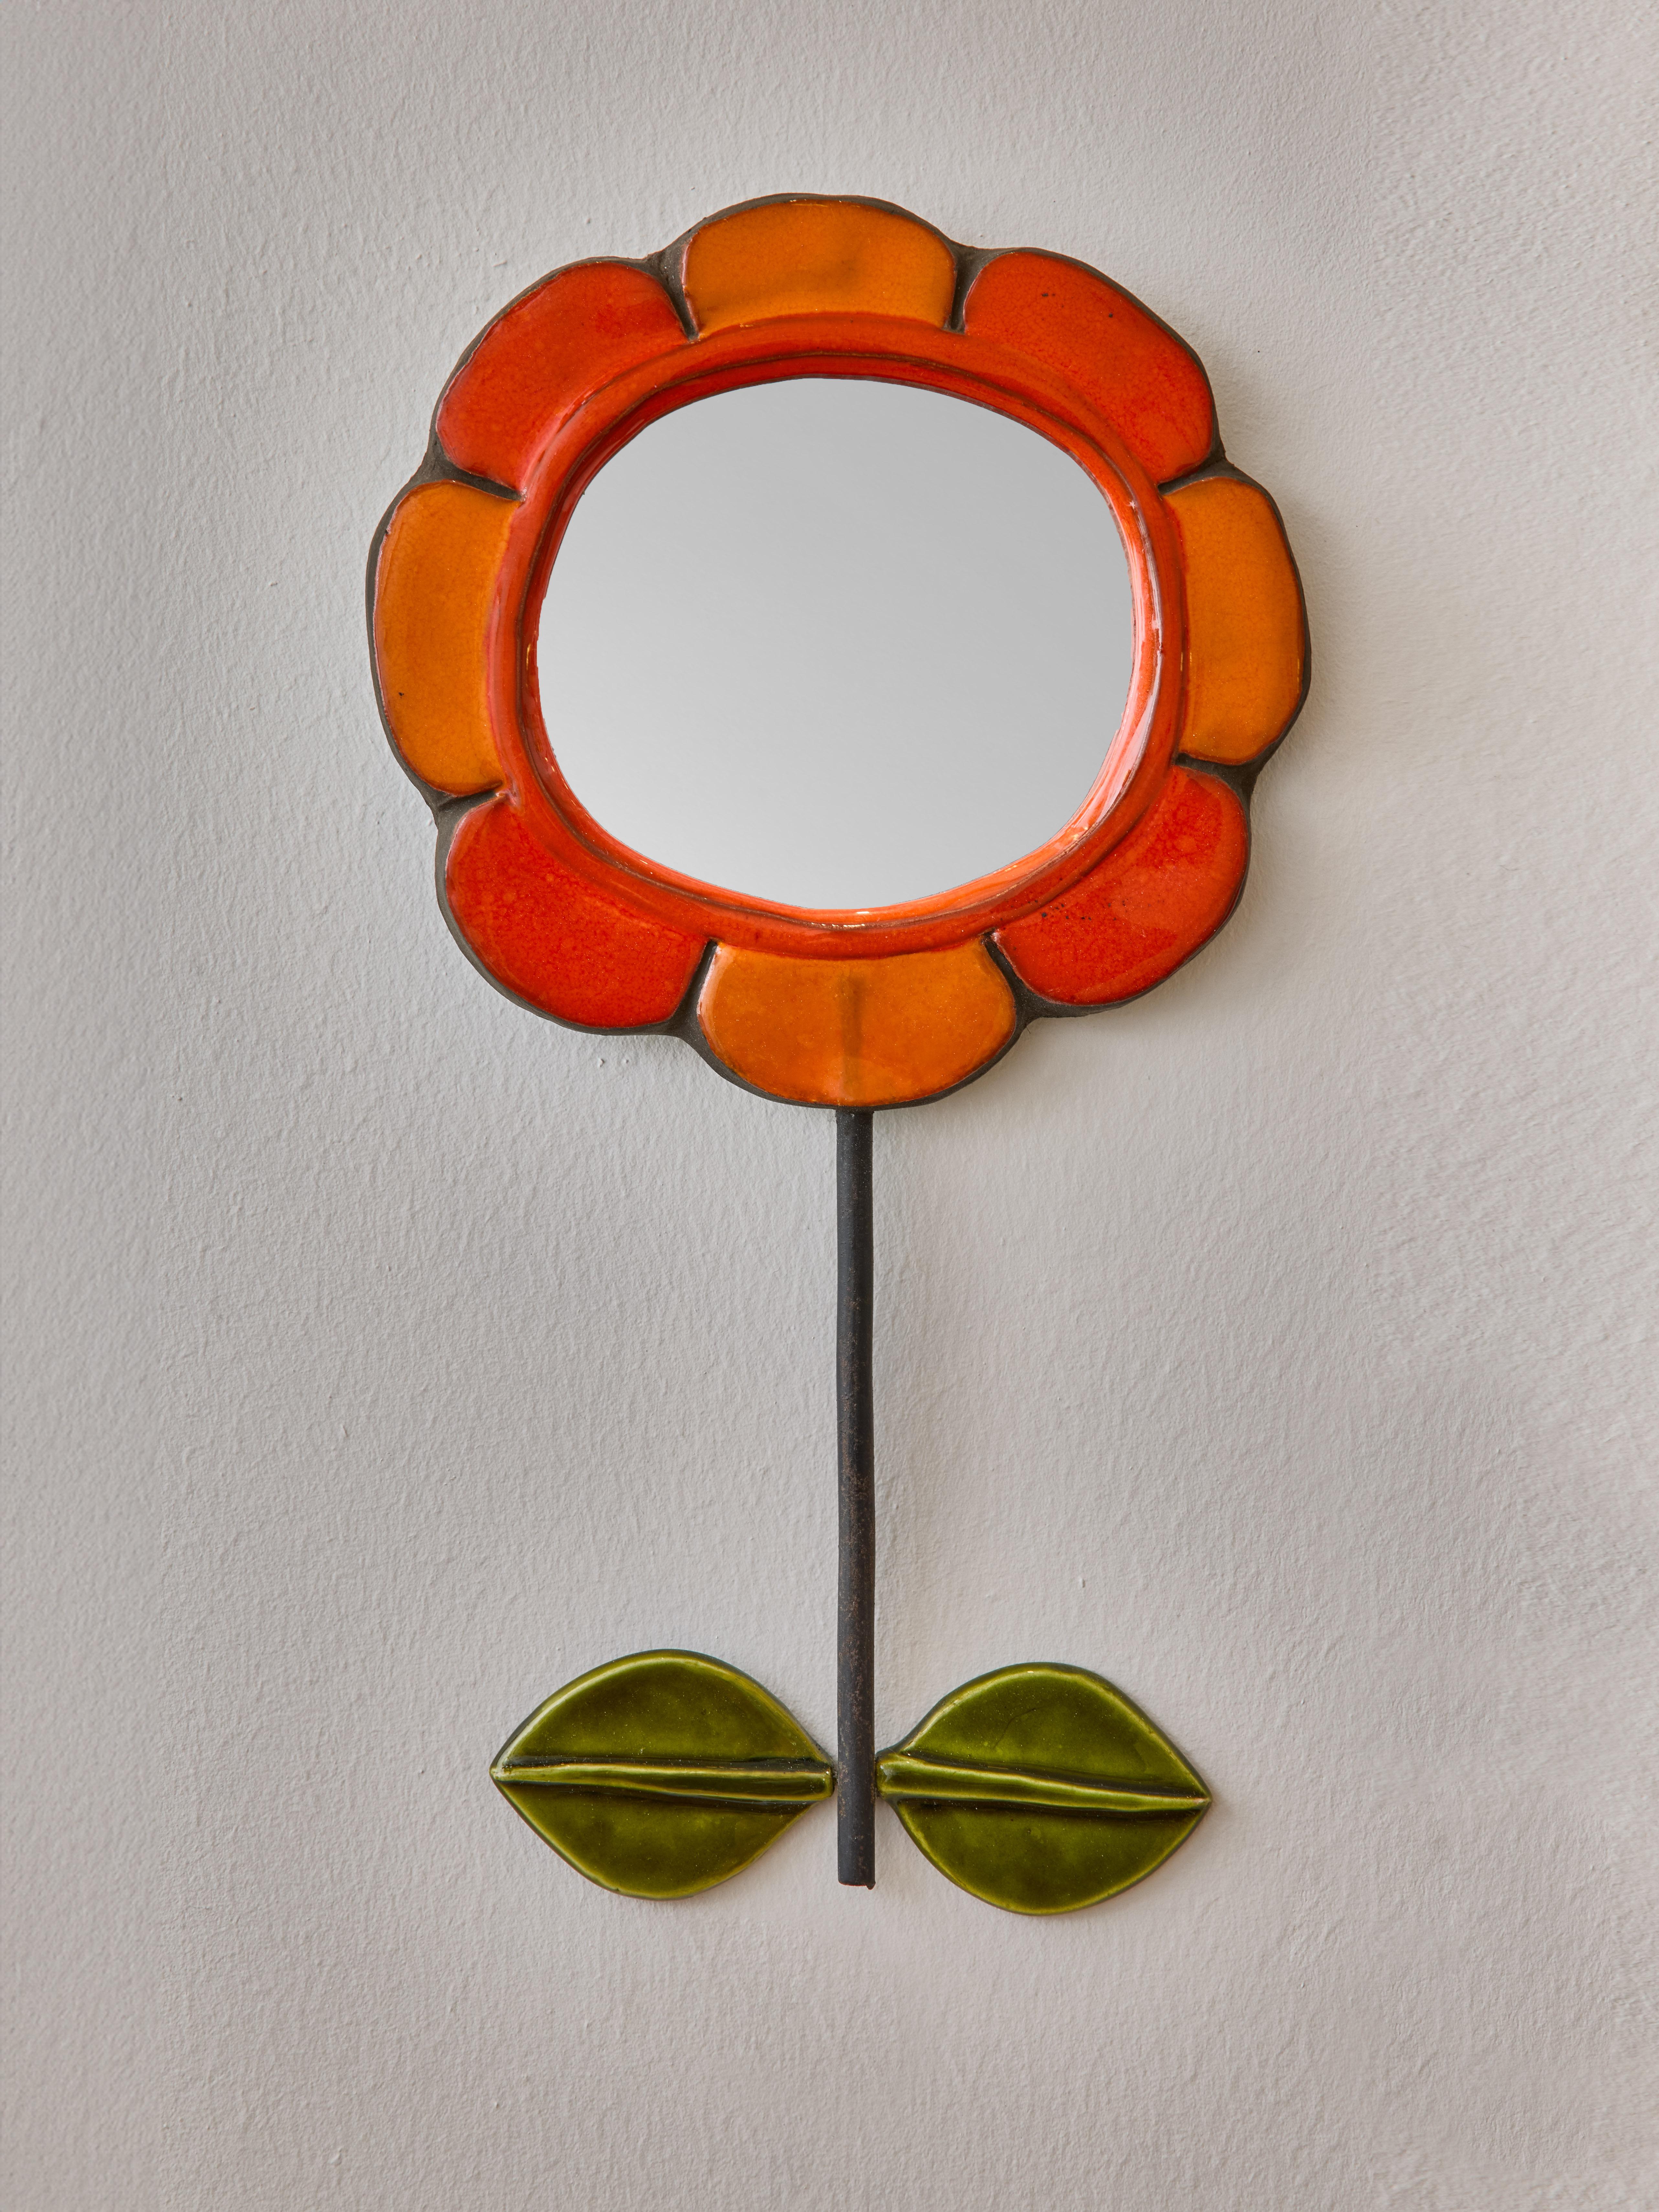 Ceramic mirror shaped like a flower with orange petals. Vertical metal stem on which is attached two green coloured ceramic leaves. Made by Mithé Espelt.

 

Marie Thérèse Espelt, aka. Mithé Espelt (1923-2020)

 

Born in the town of Lunel, near